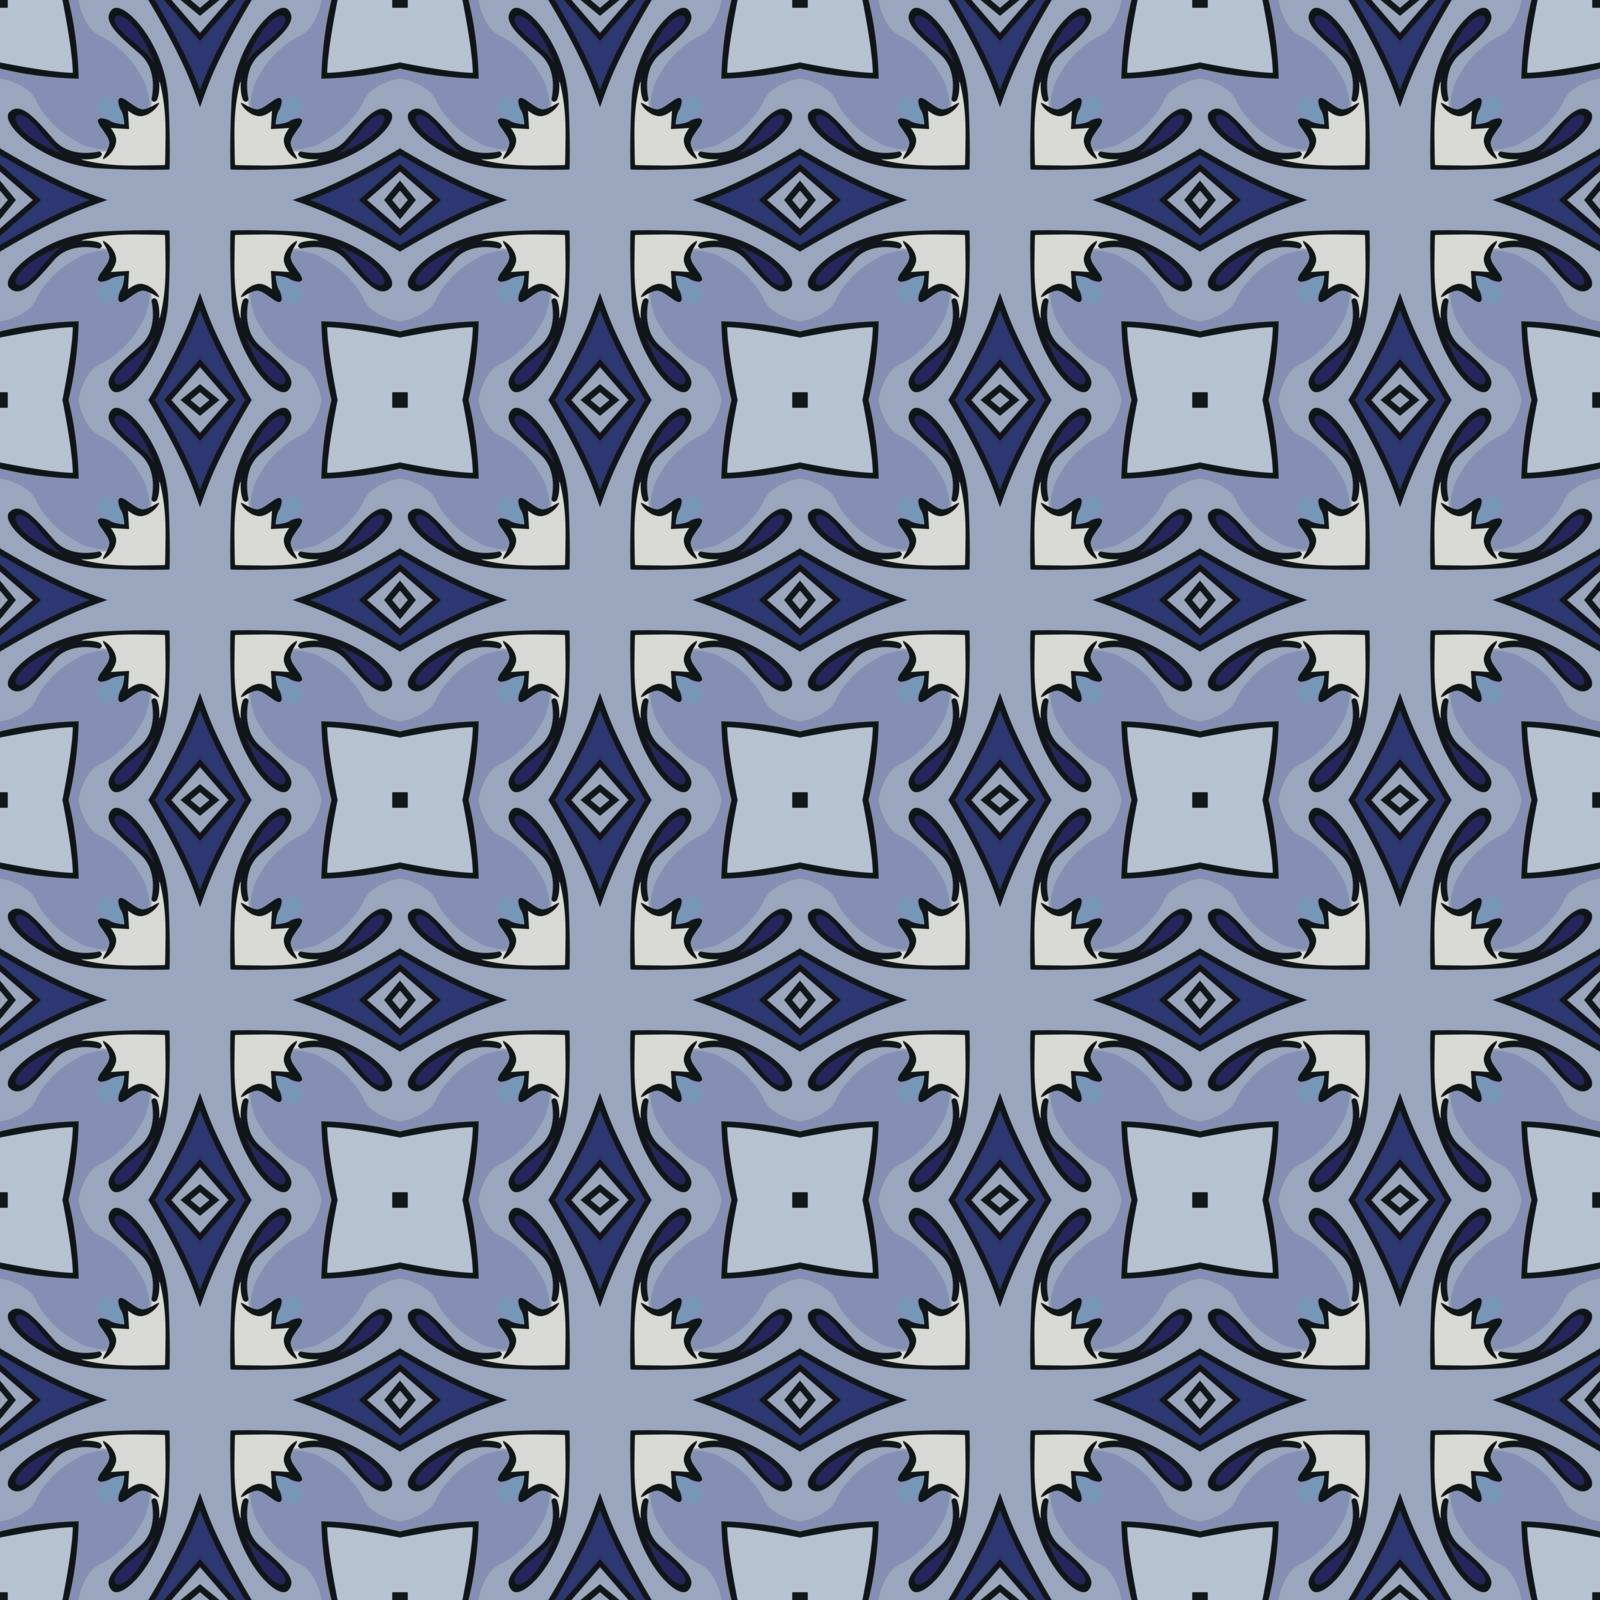 Seamless illustrated pattern made of abstract elements in beige, shades of blue and black